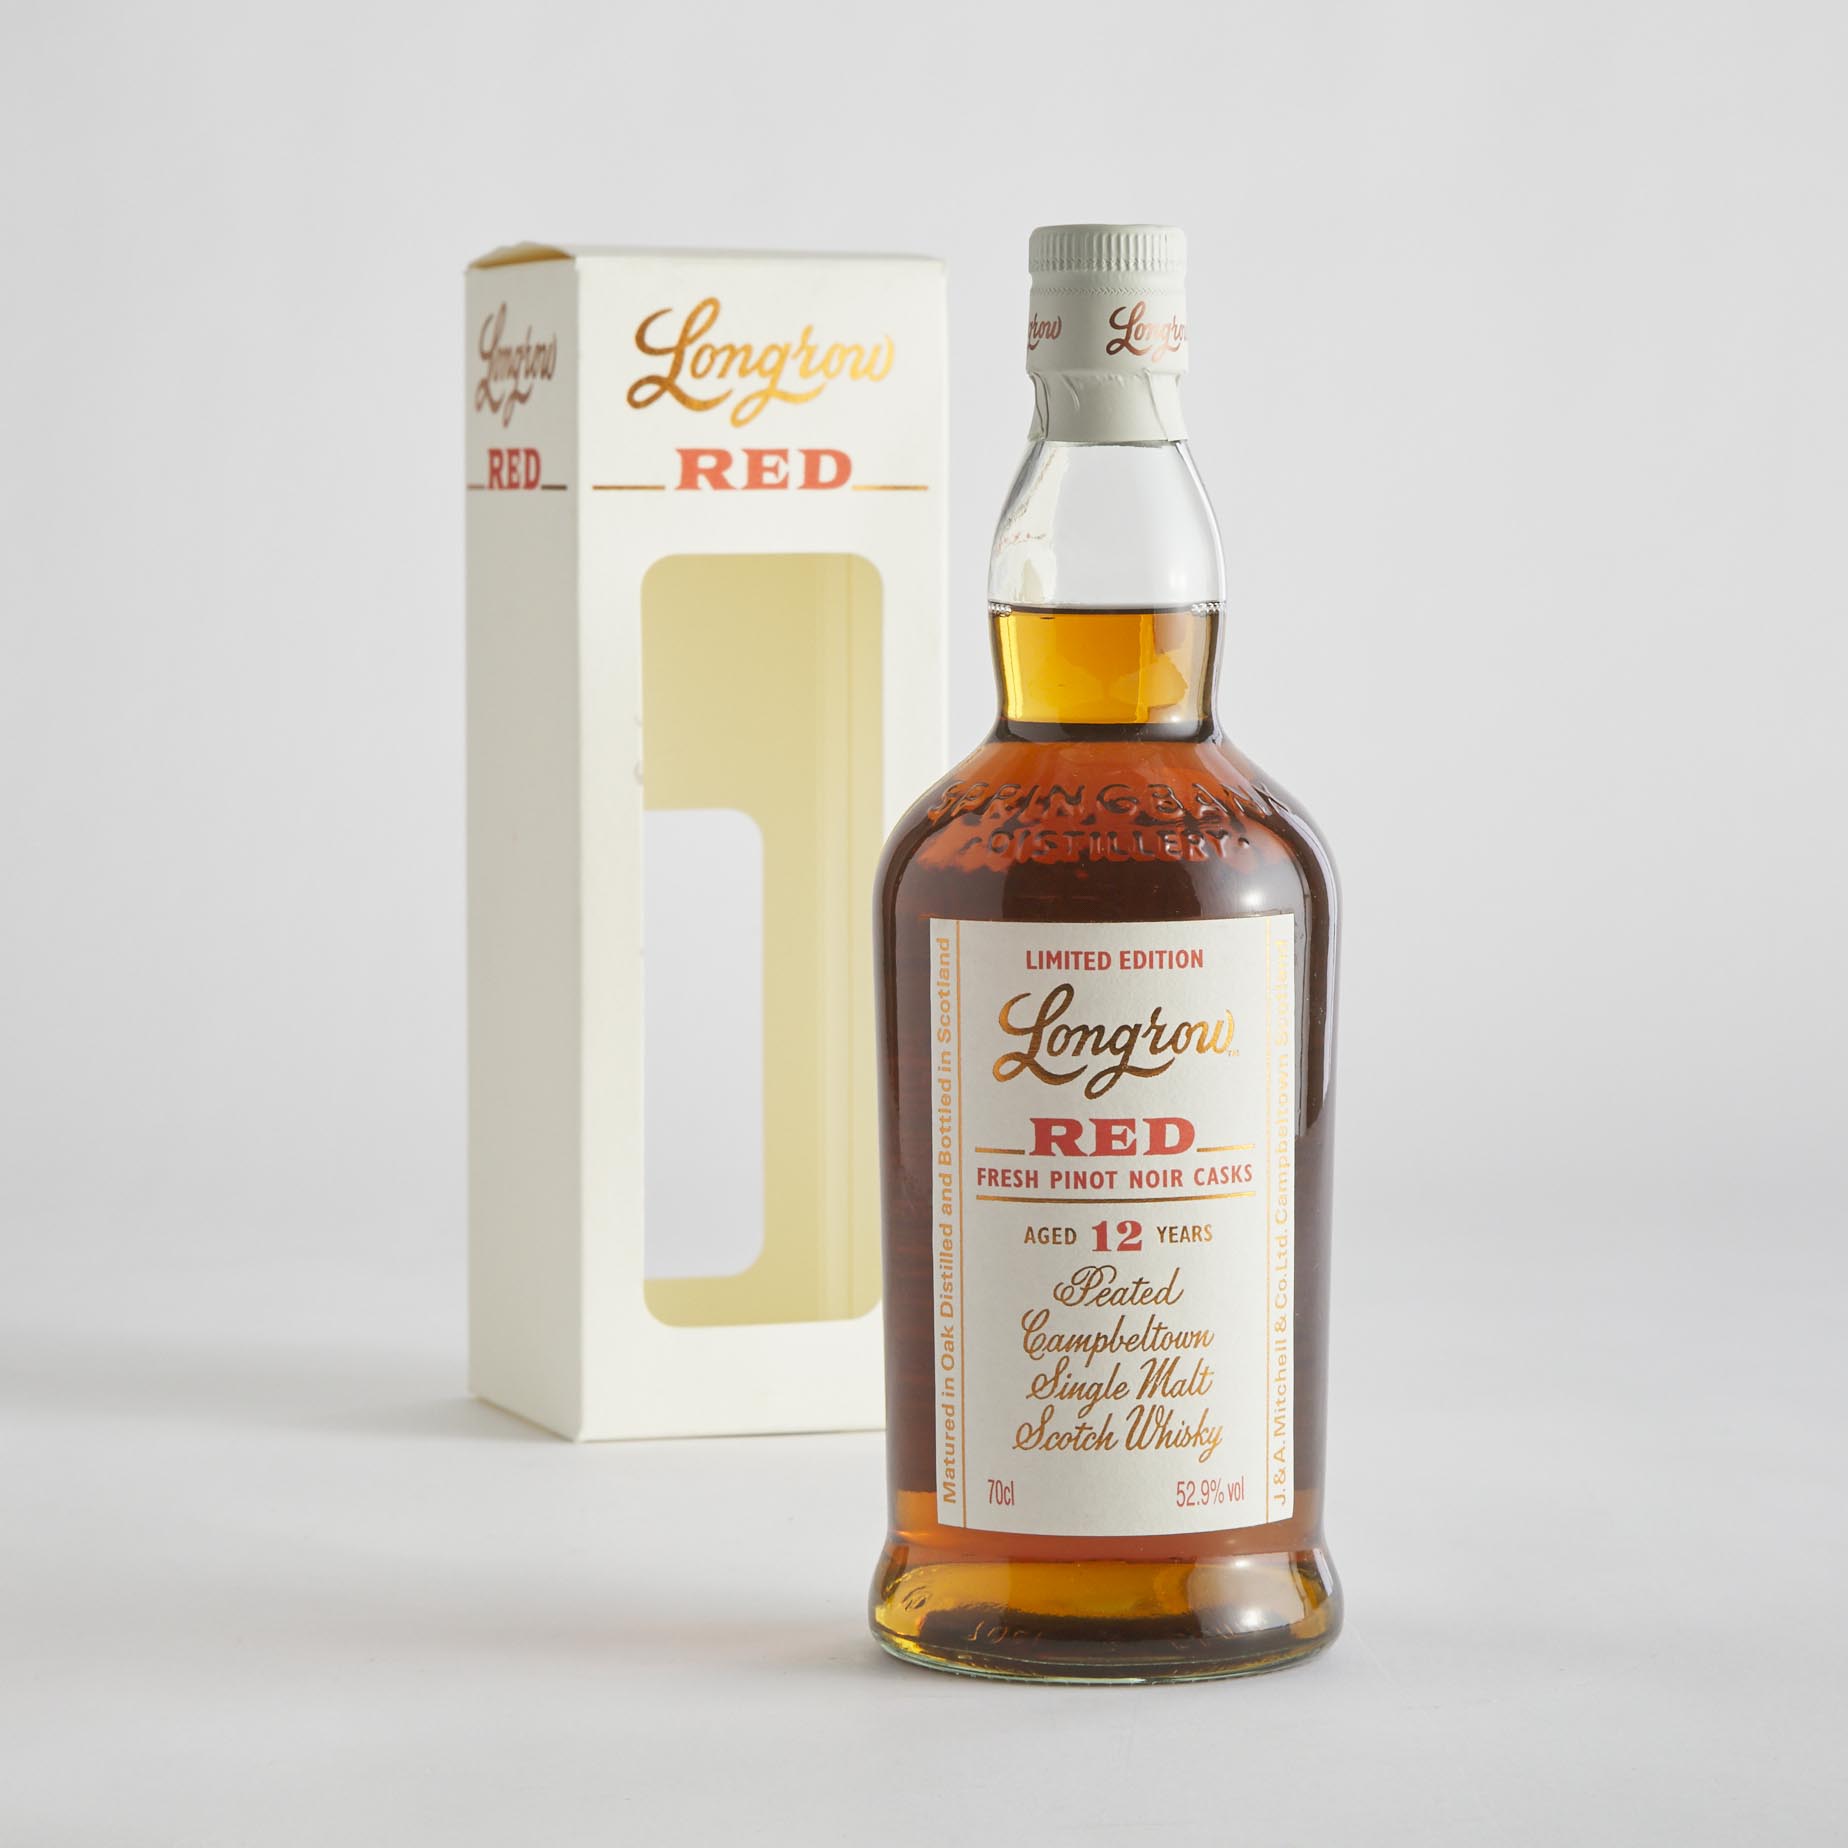 LONGROW PEATED CAMPBELTOWN SINGLE MALT SCOTCH WHISKY 12 YEARS (ONE 70 CL)